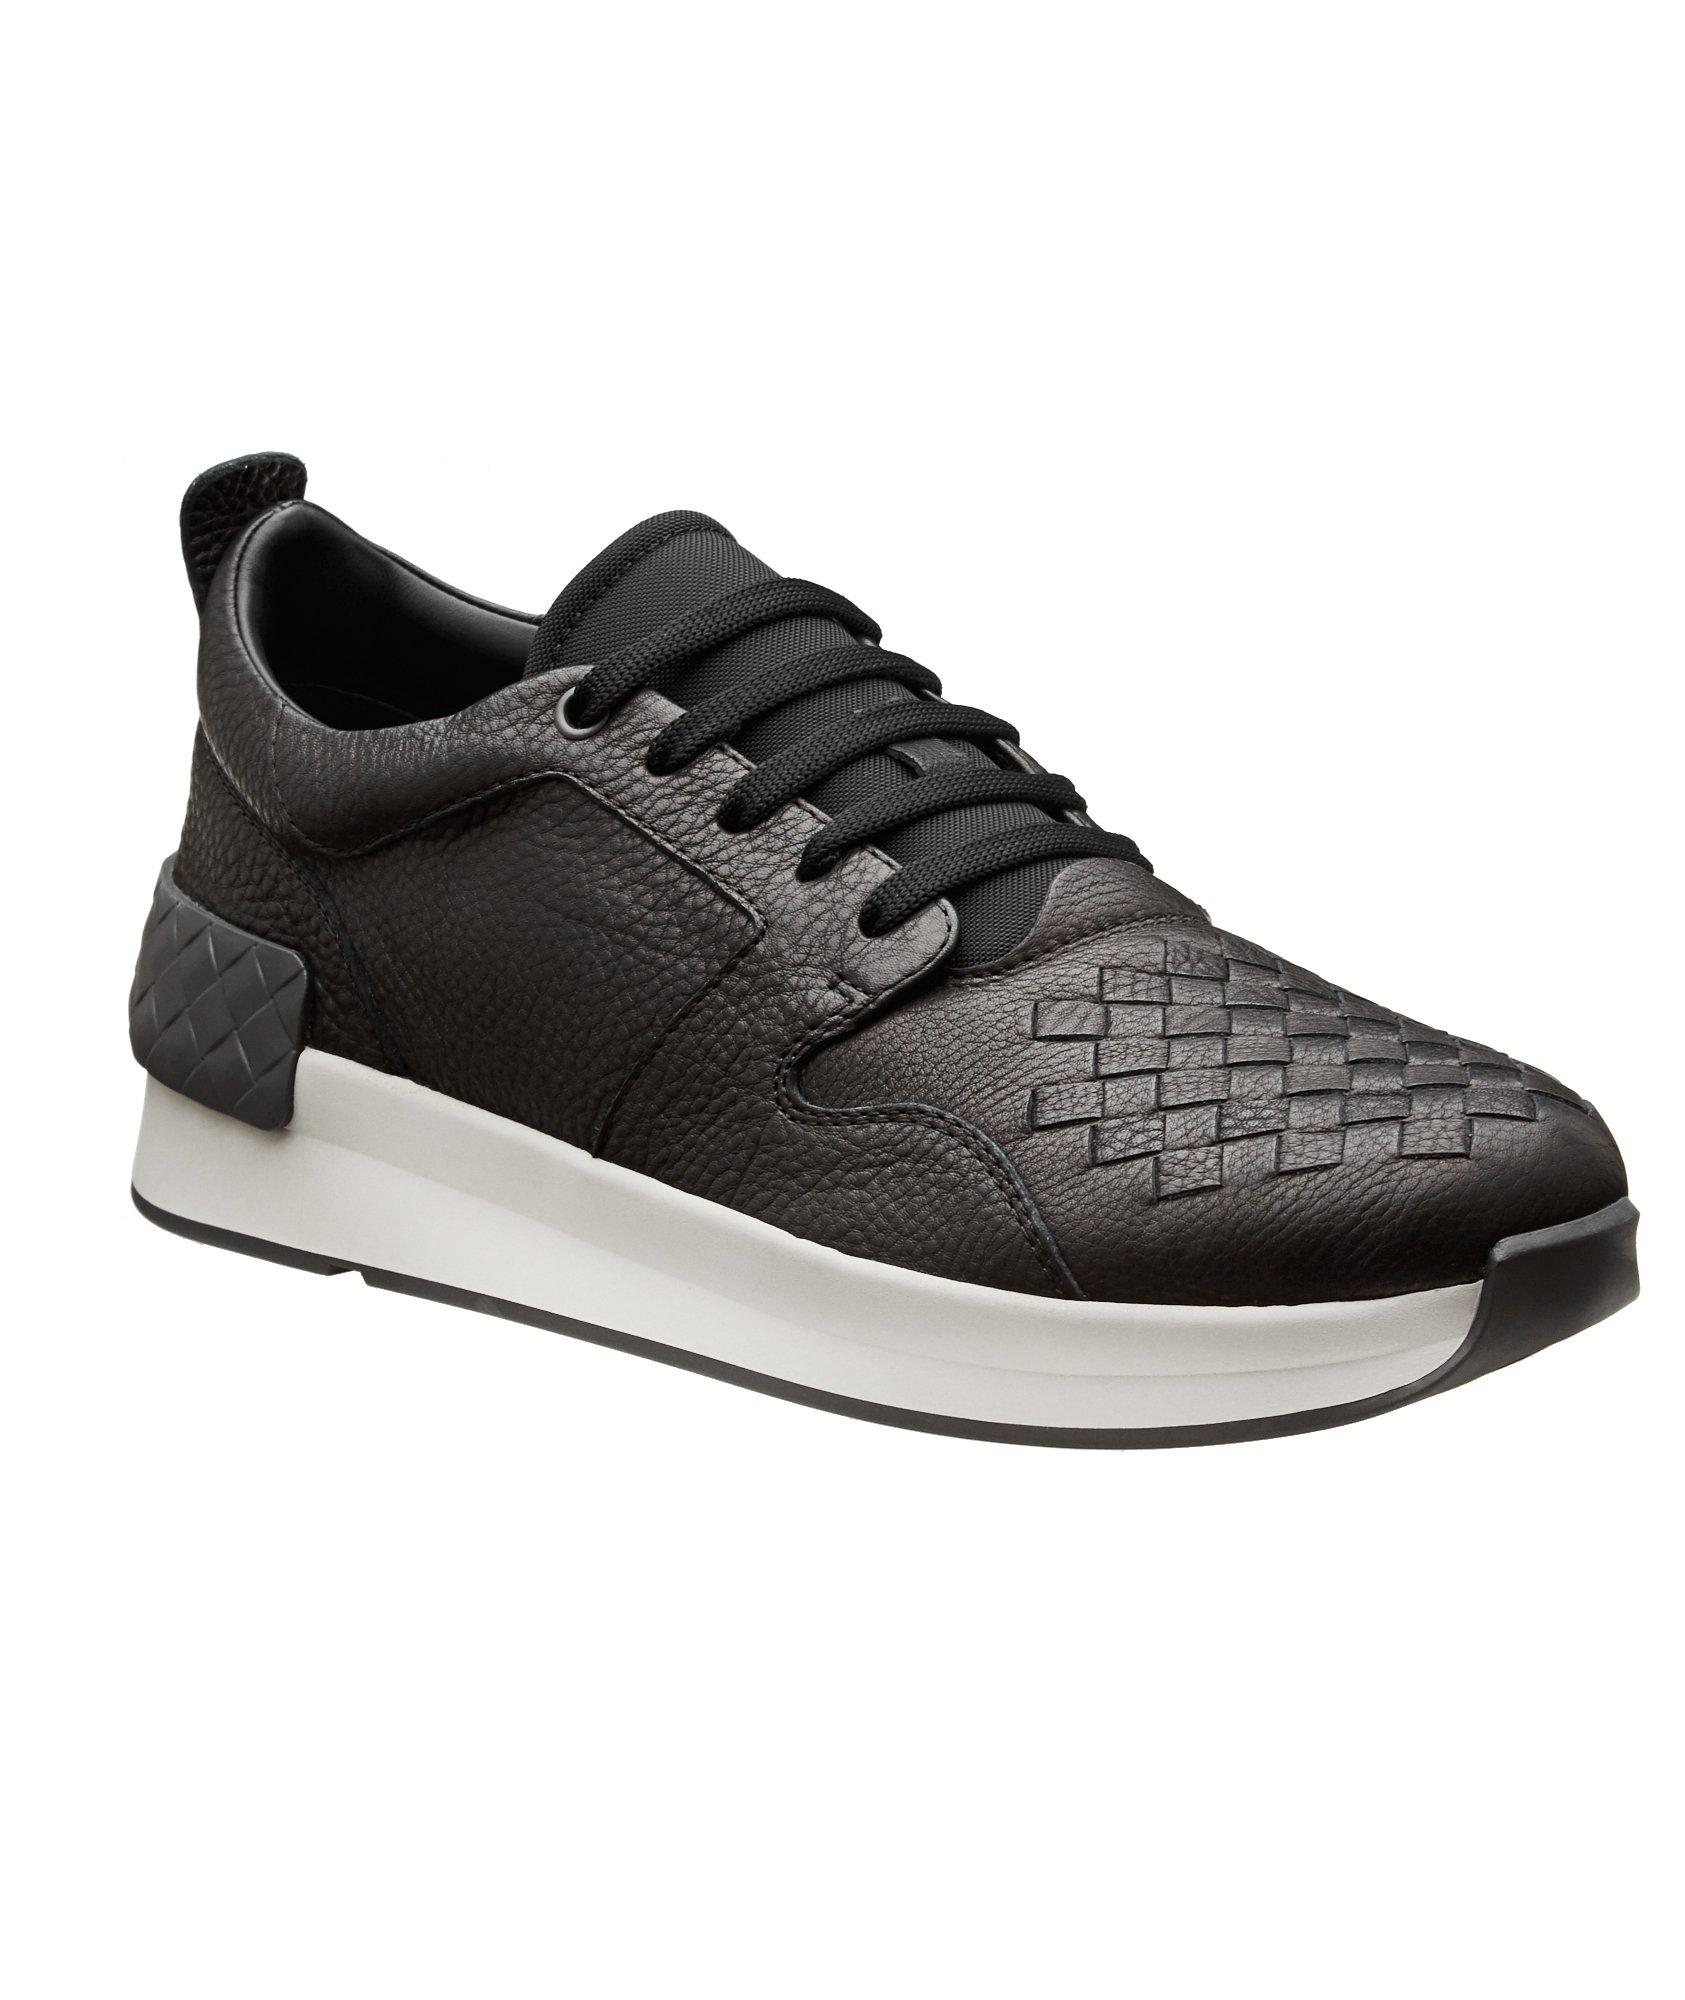 Woven Leather Sneakers image 0